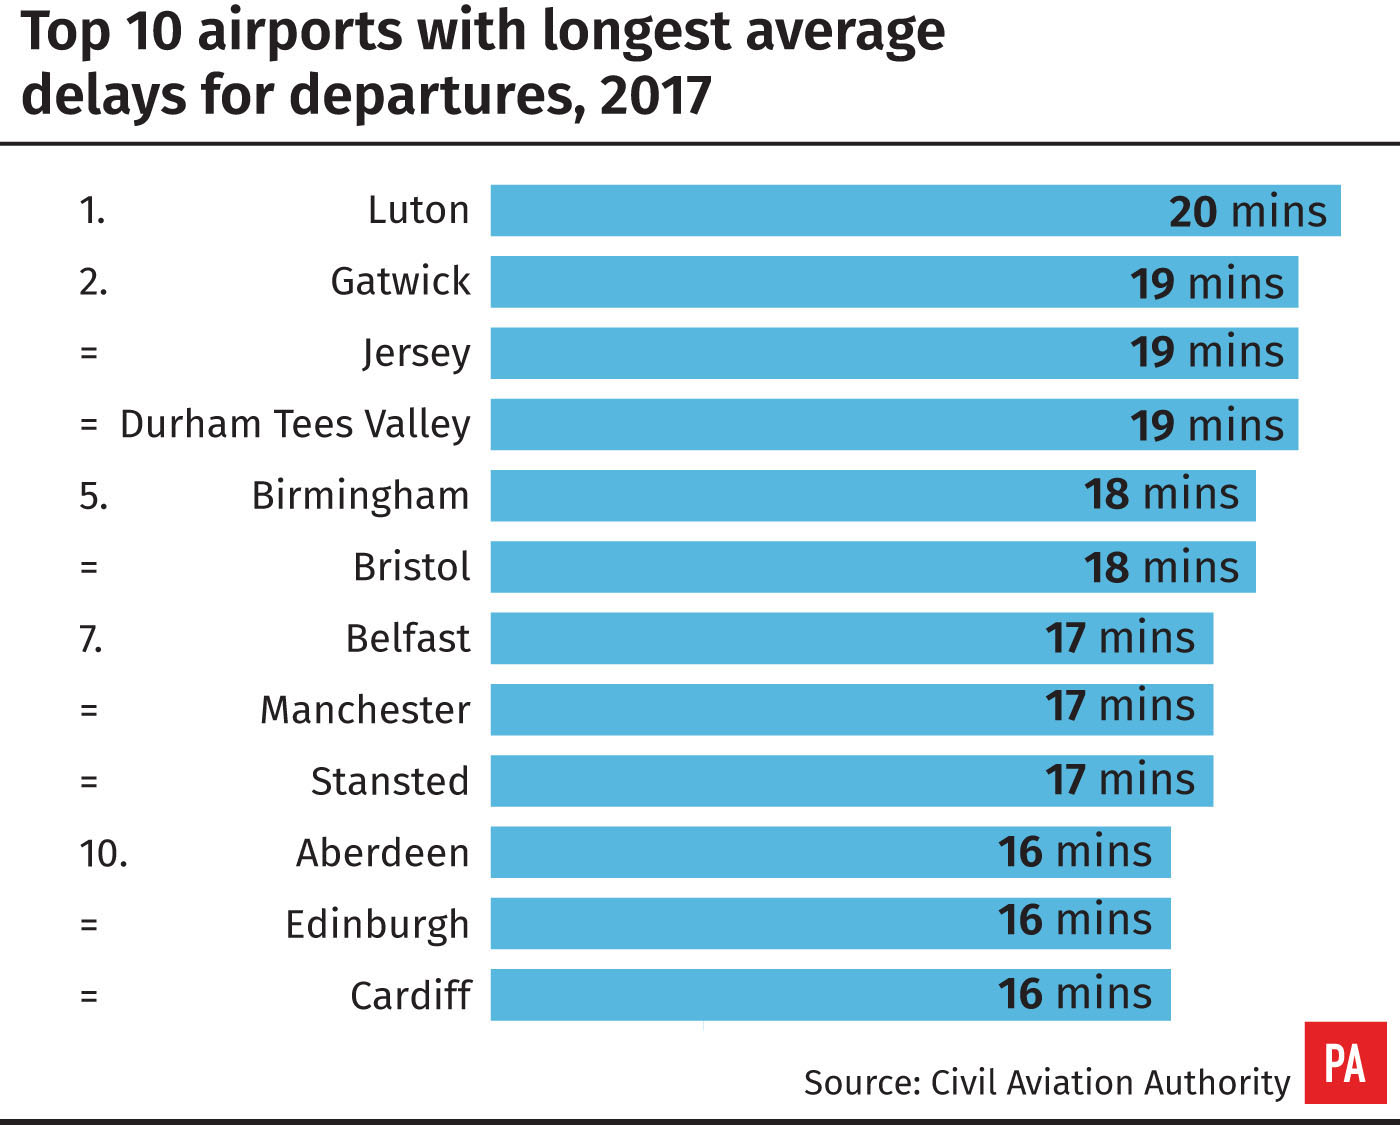 Top 10 airports with longest average delays for departures, 2017